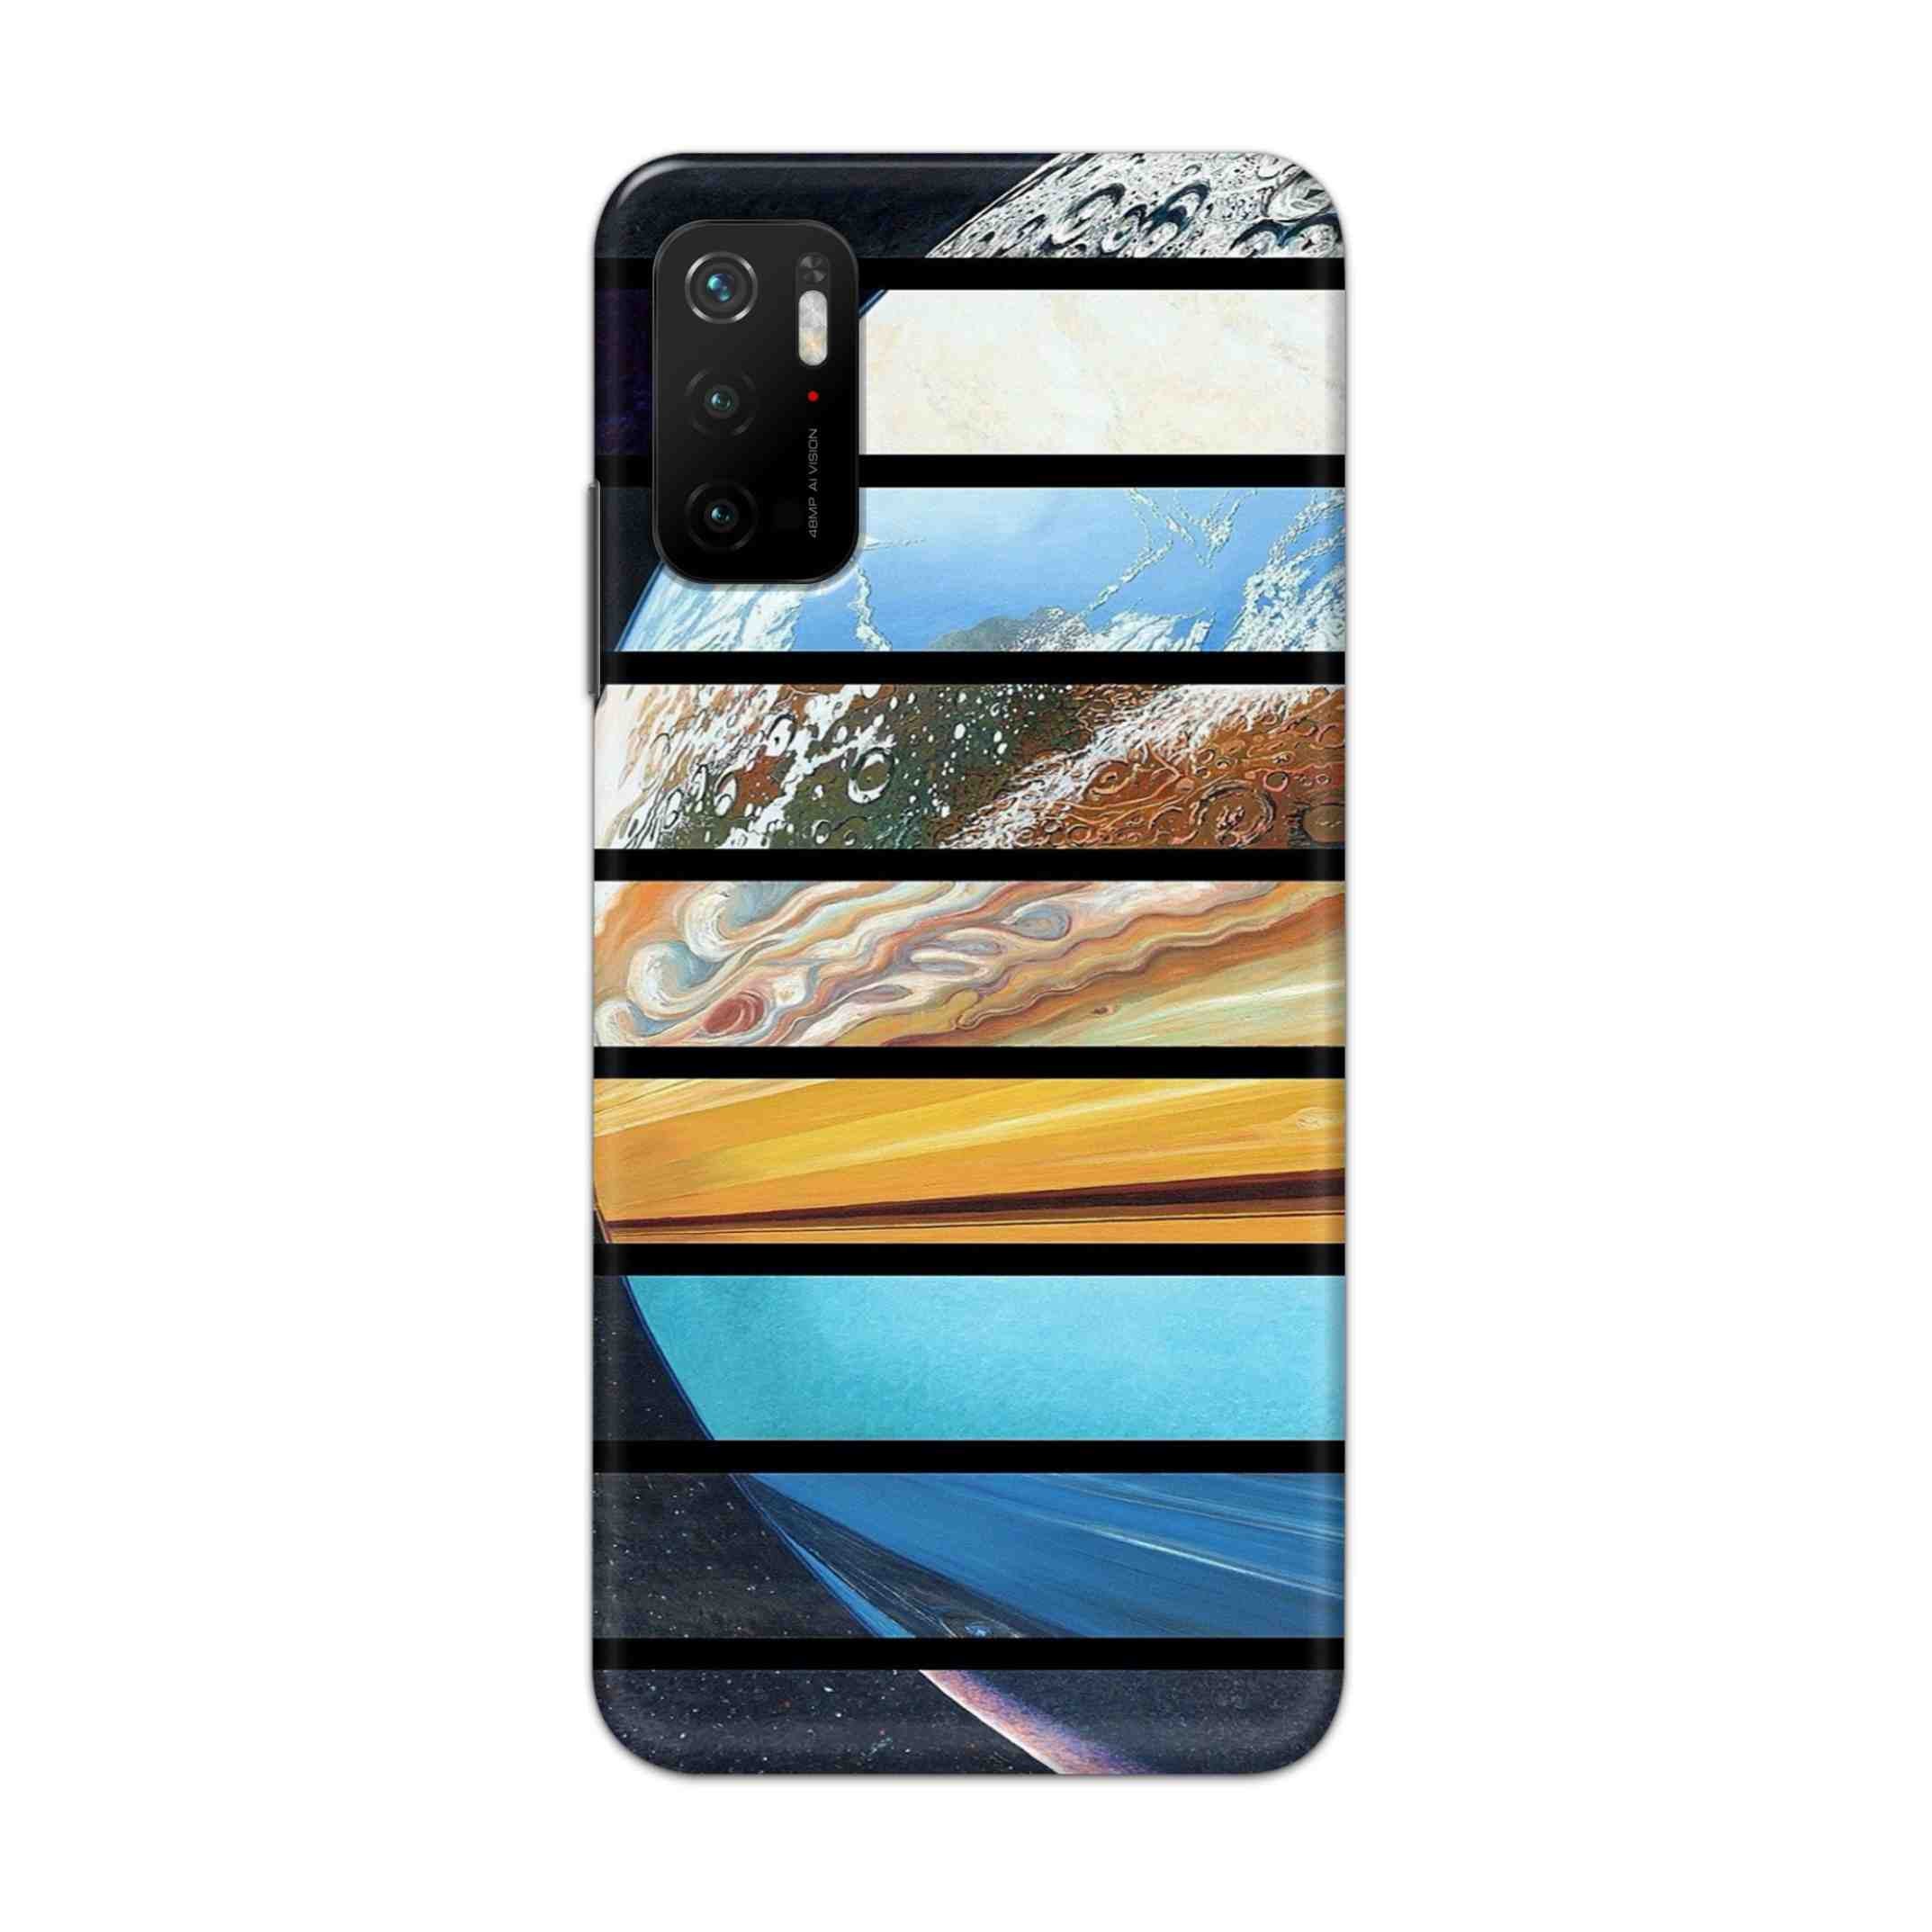 Buy Colourful Earth Hard Back Mobile Phone Case Cover For Poco M3 Pro 5G Online